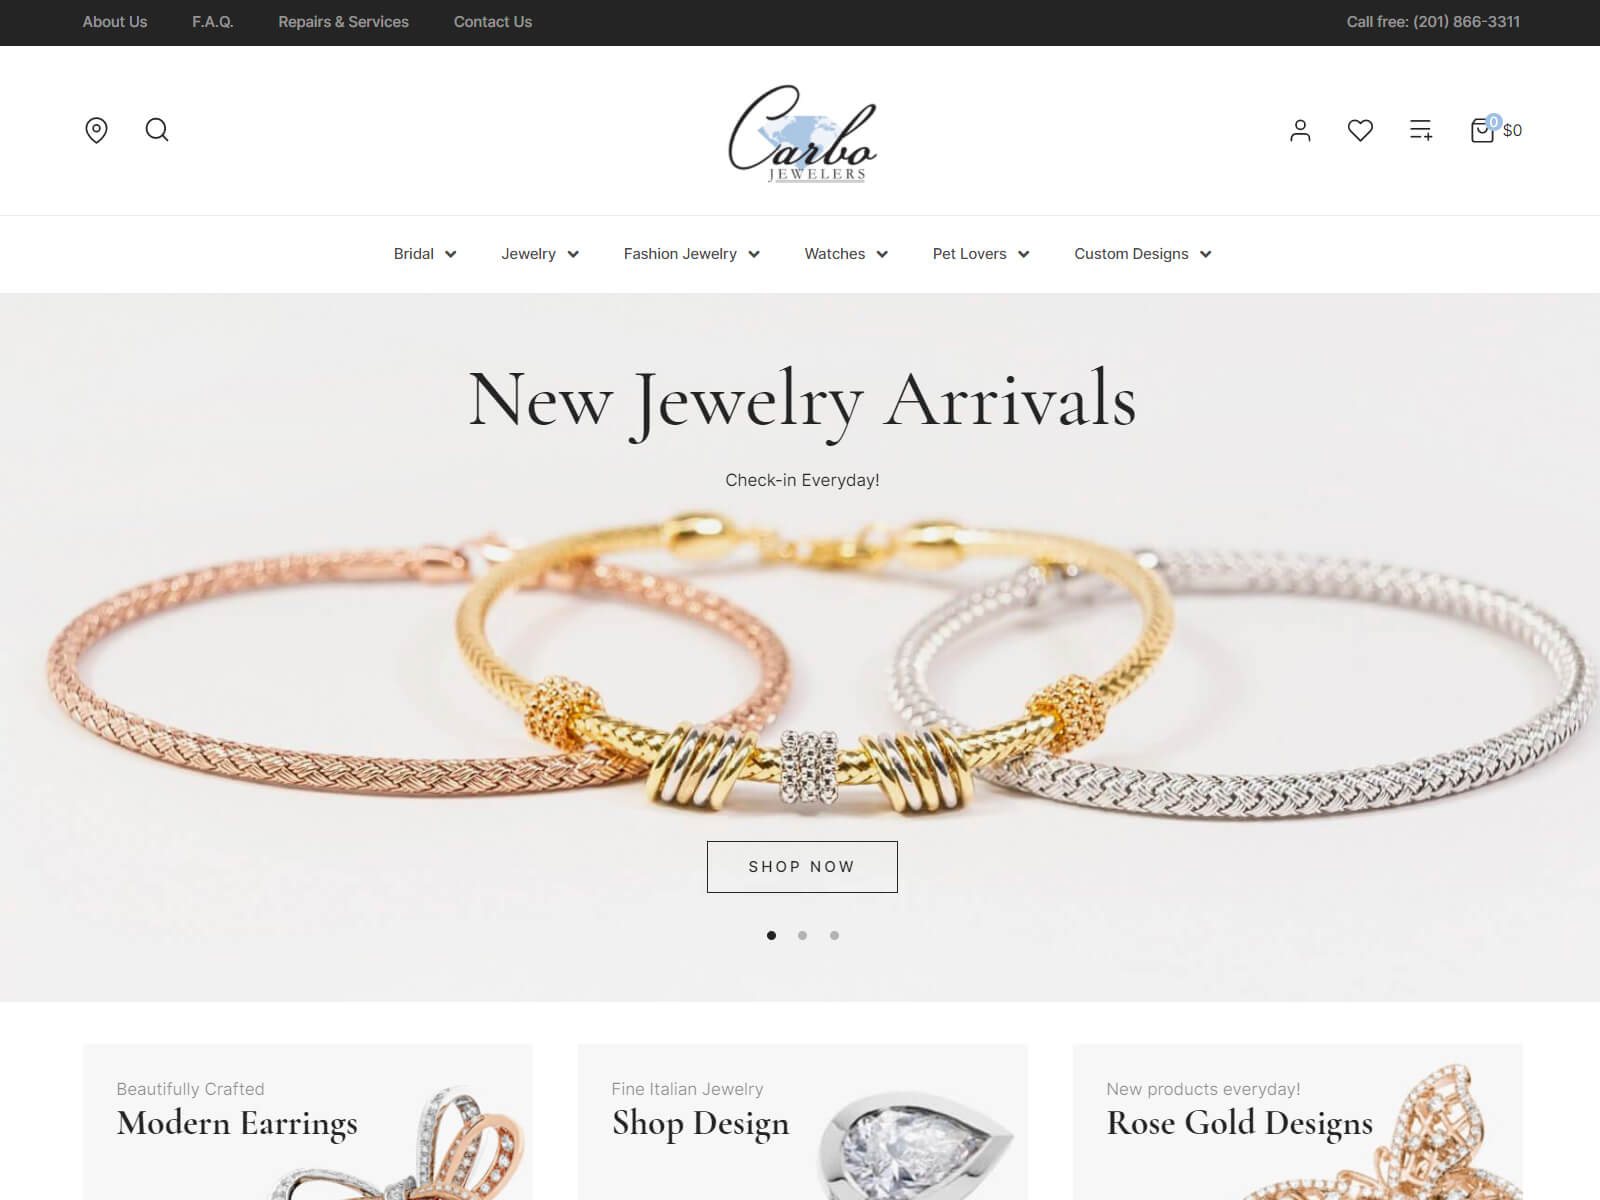 Carbo Jewelers eCommerce website design and development